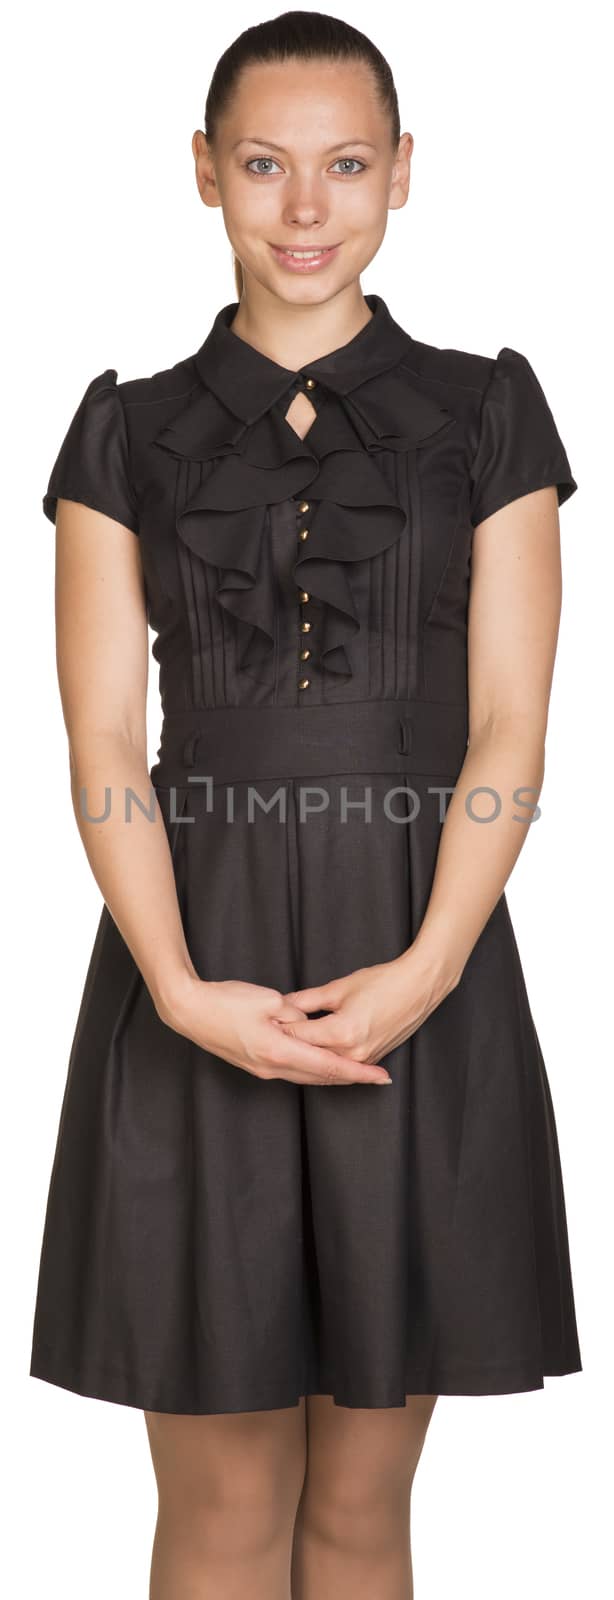 Attractive smiling young woman in black dress. Isolated on white